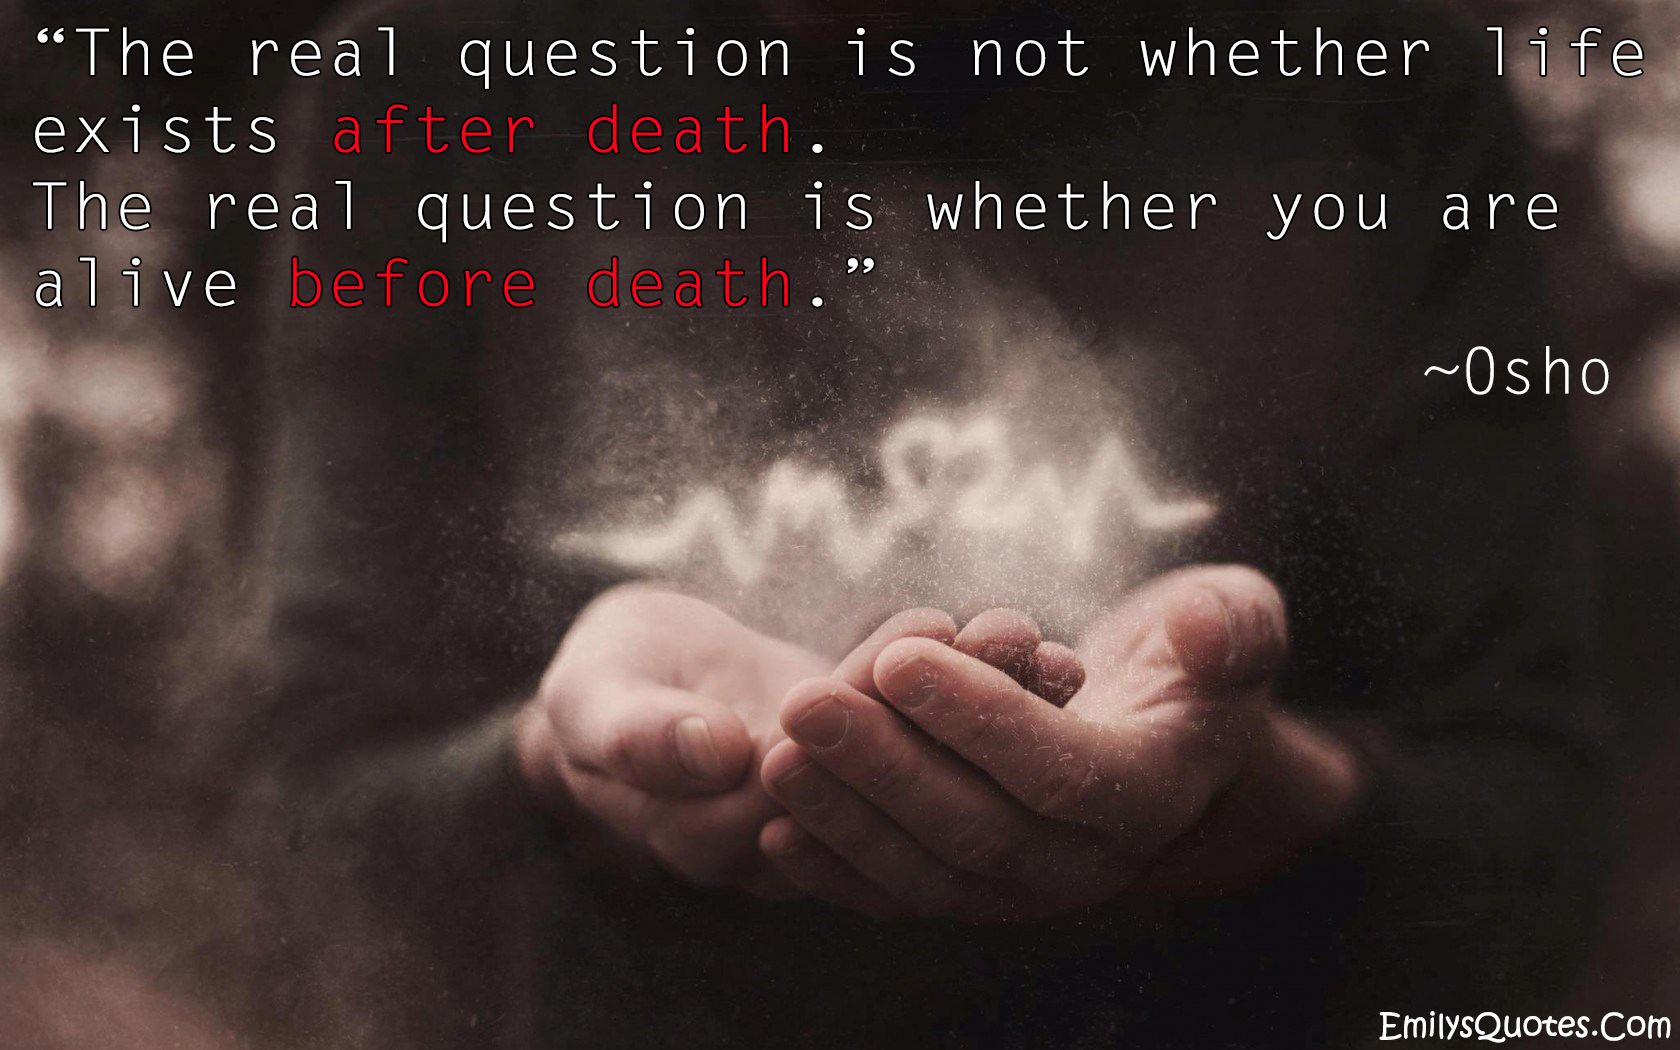 The real question is not whether life exists after death. The real question is whether you are alive before death